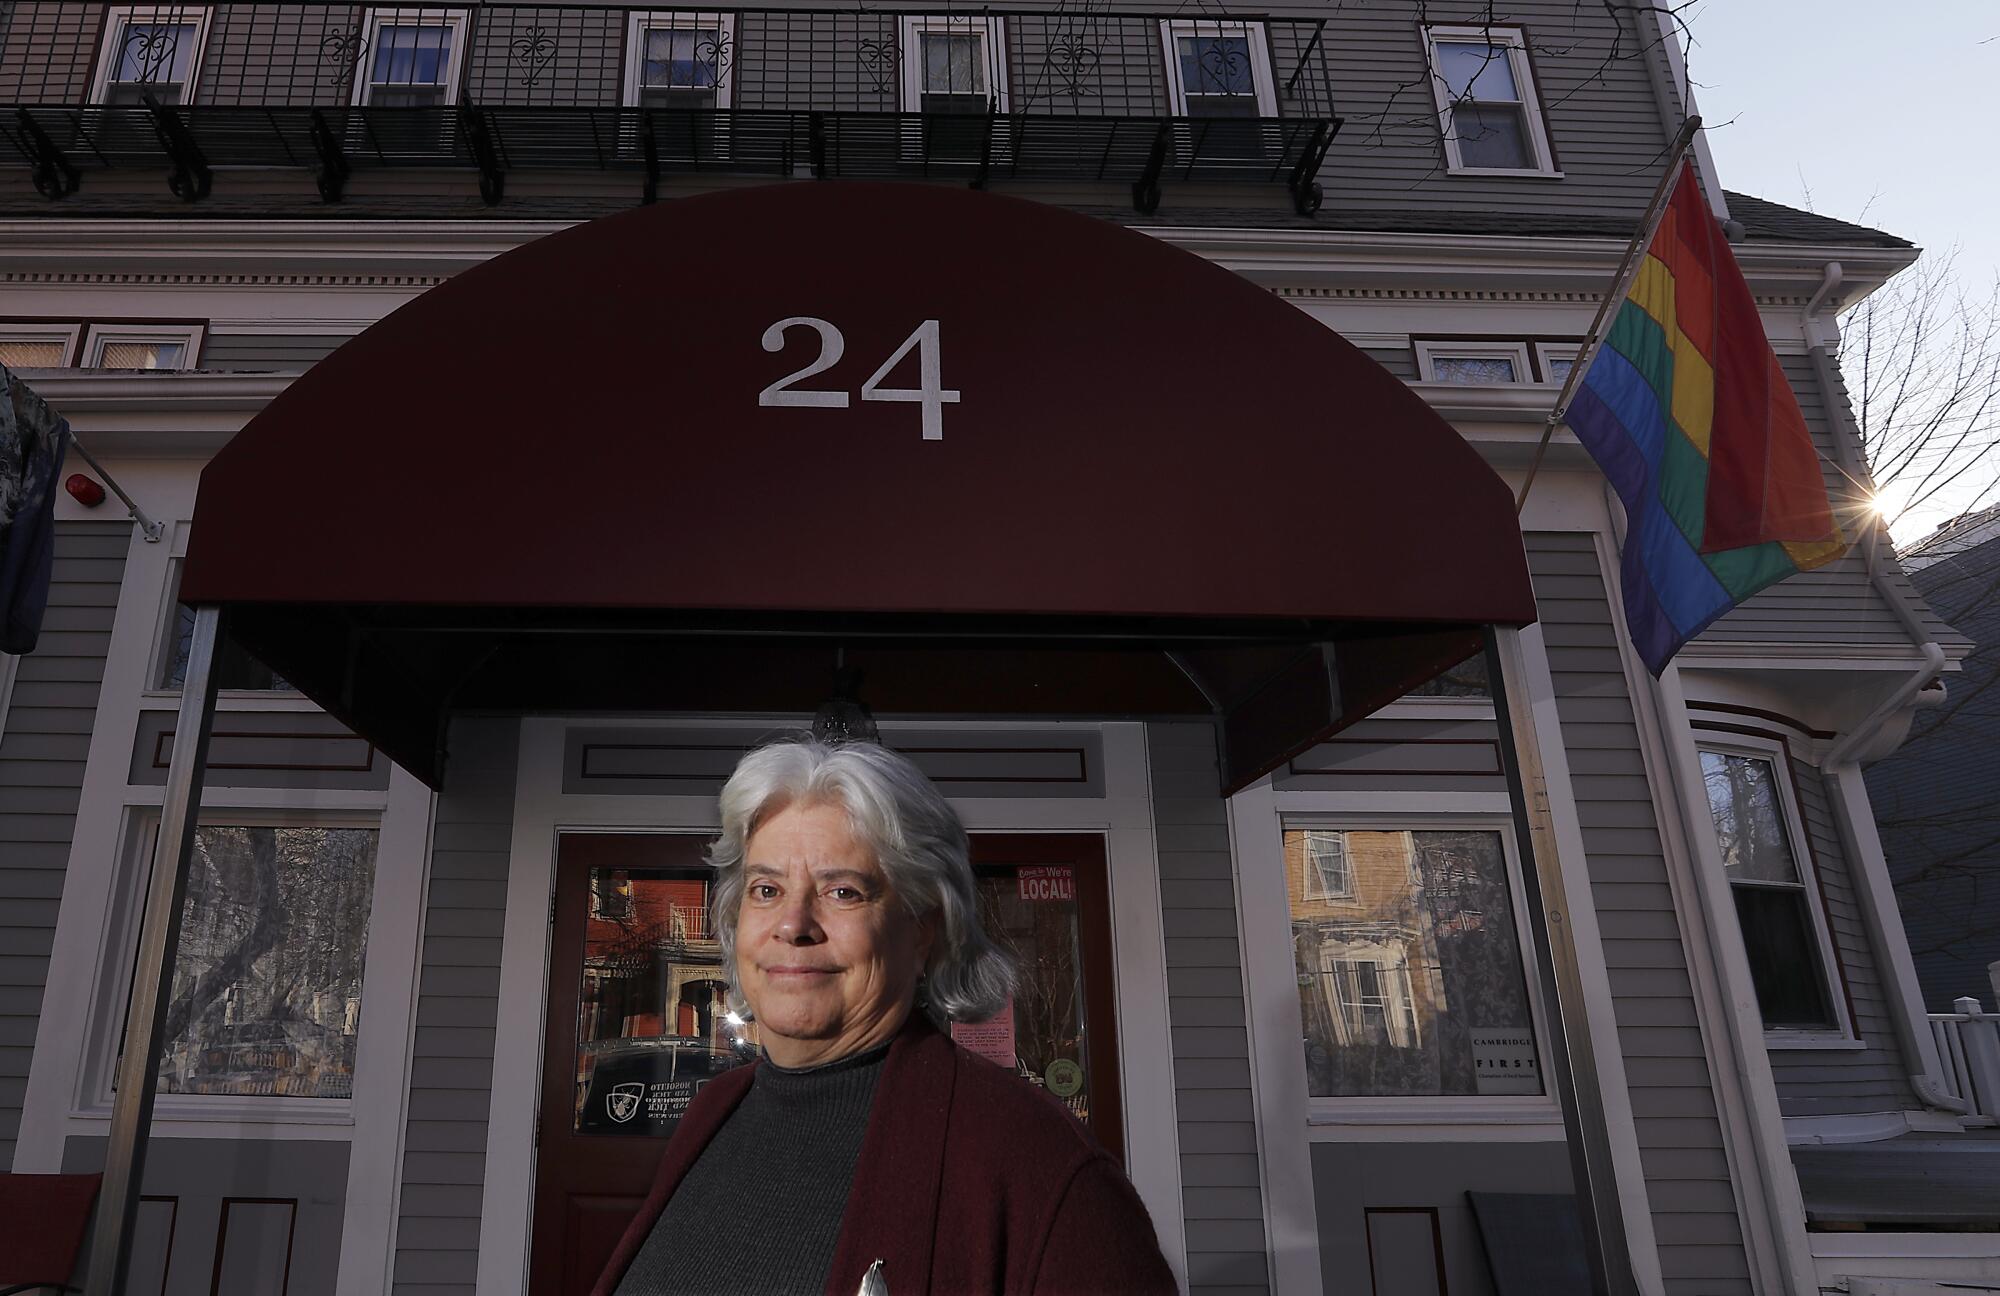 Rachael Solem, owner of Irving House B&B near Harvard, worries about whether Sen. Elizabeth Warren could win over voters in other states.